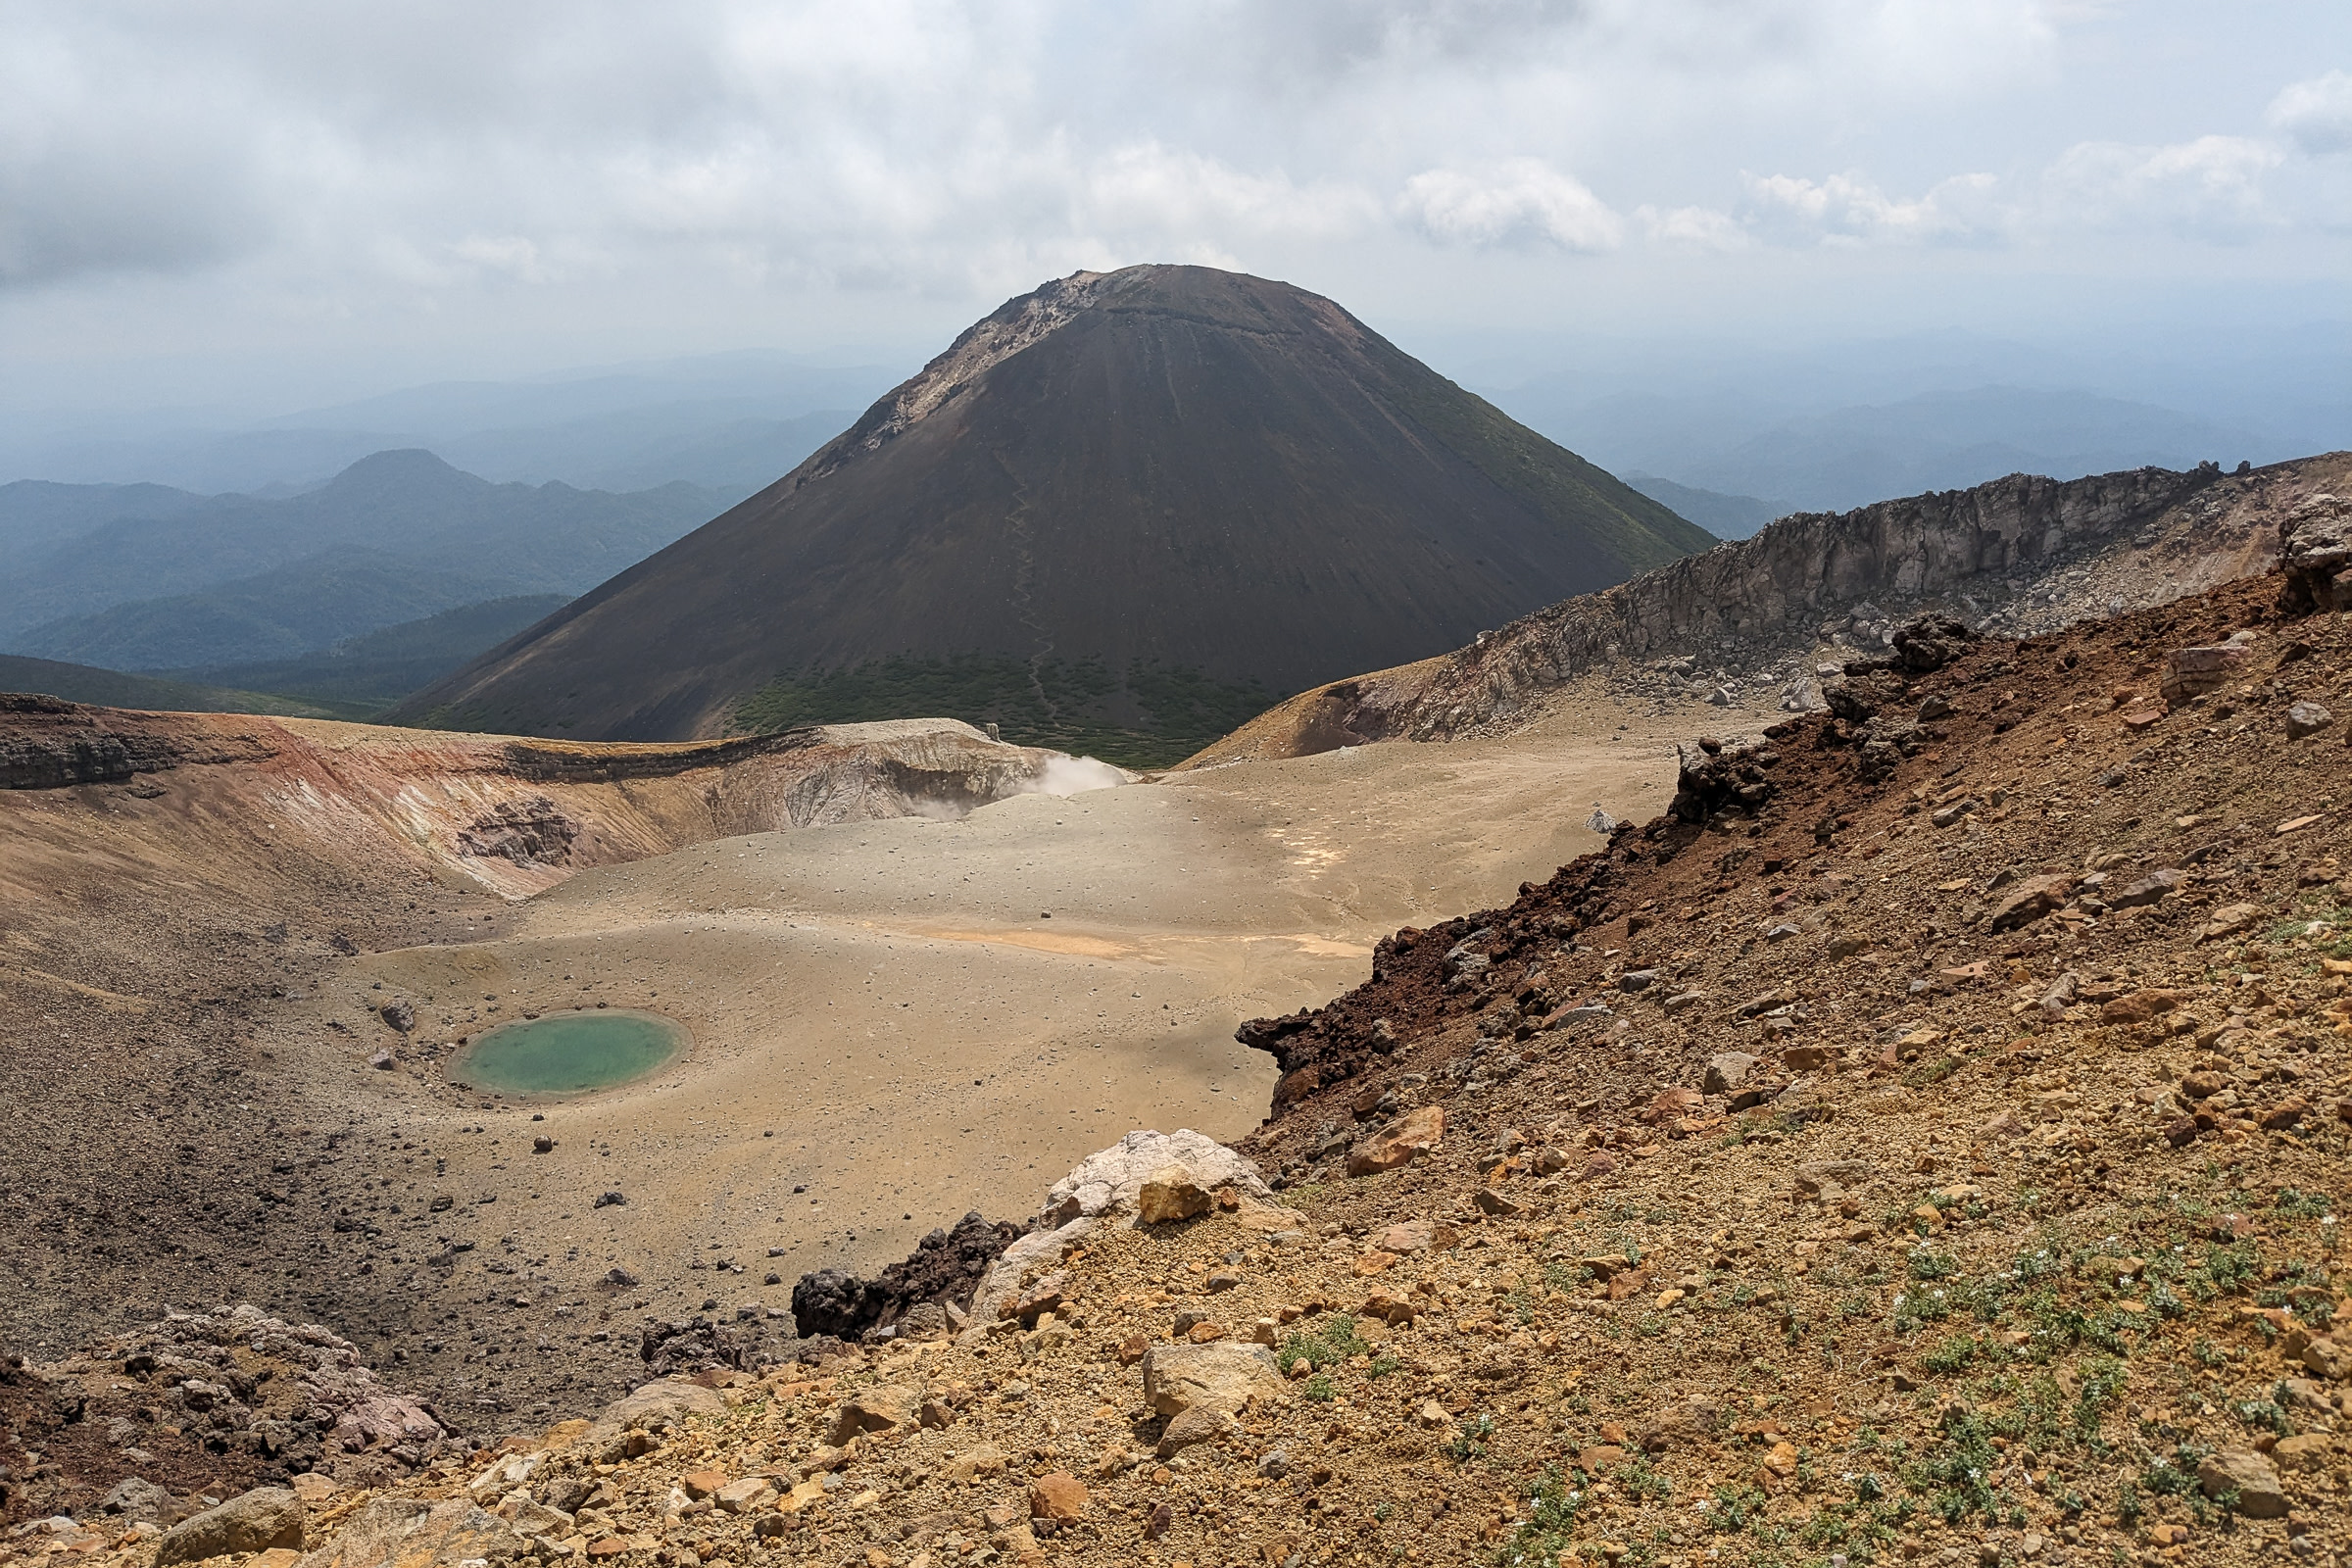 One of Mt. Meakan's crater pools looks small compared to Mt. Akanfuji's imposing figure behind it.